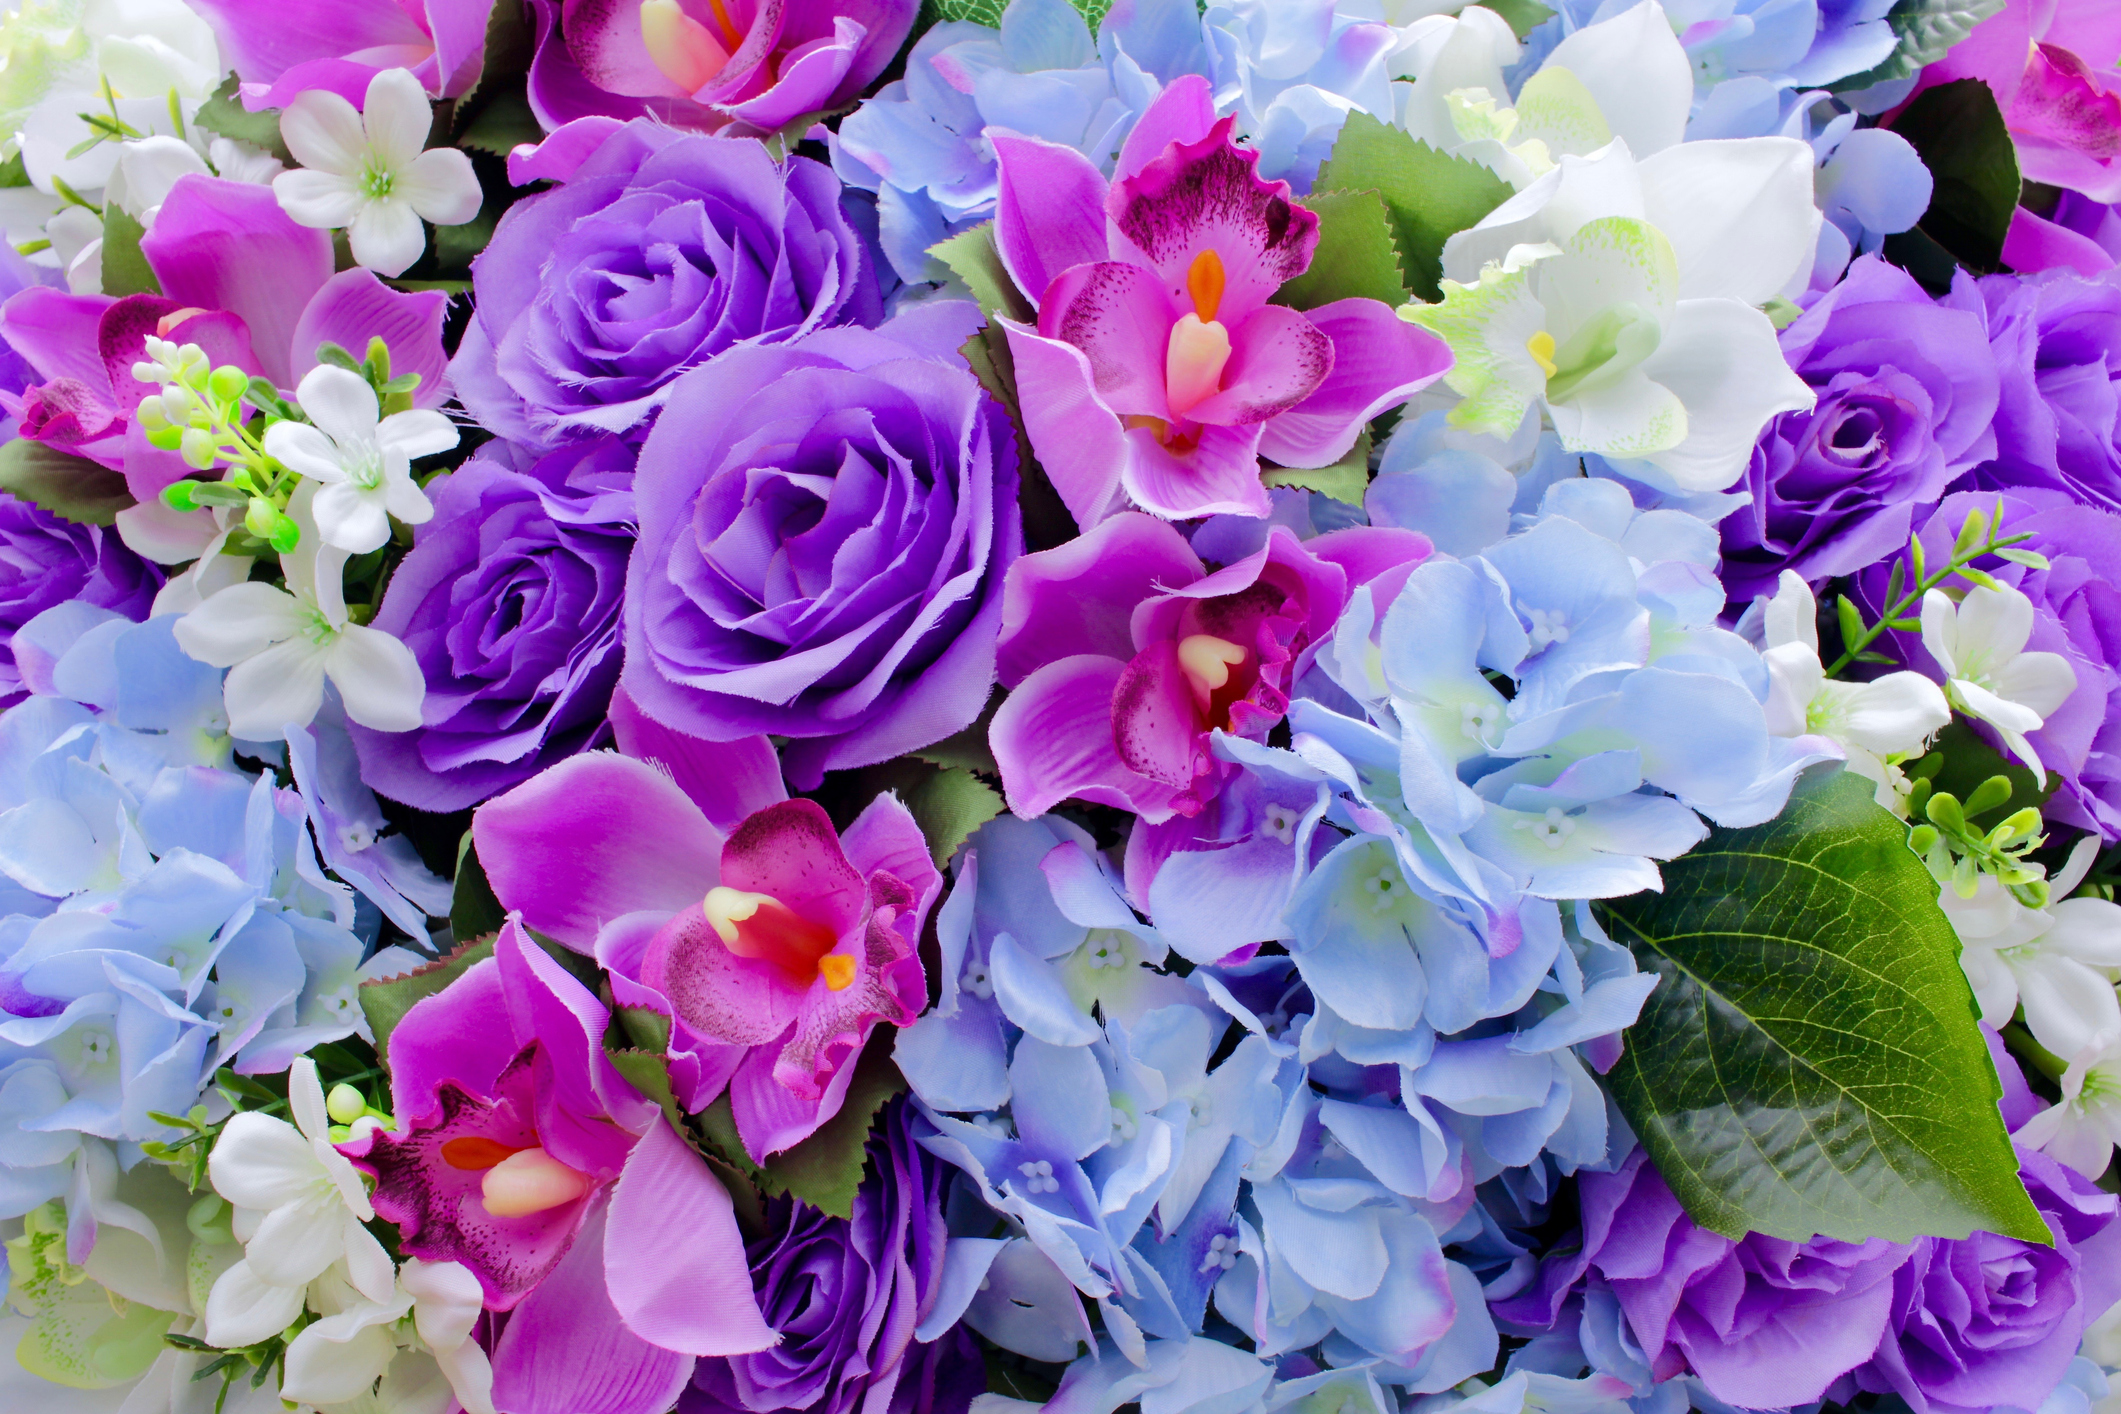 Colorful artificial flowers background, purple, pink, white, blue color, rose, orchid